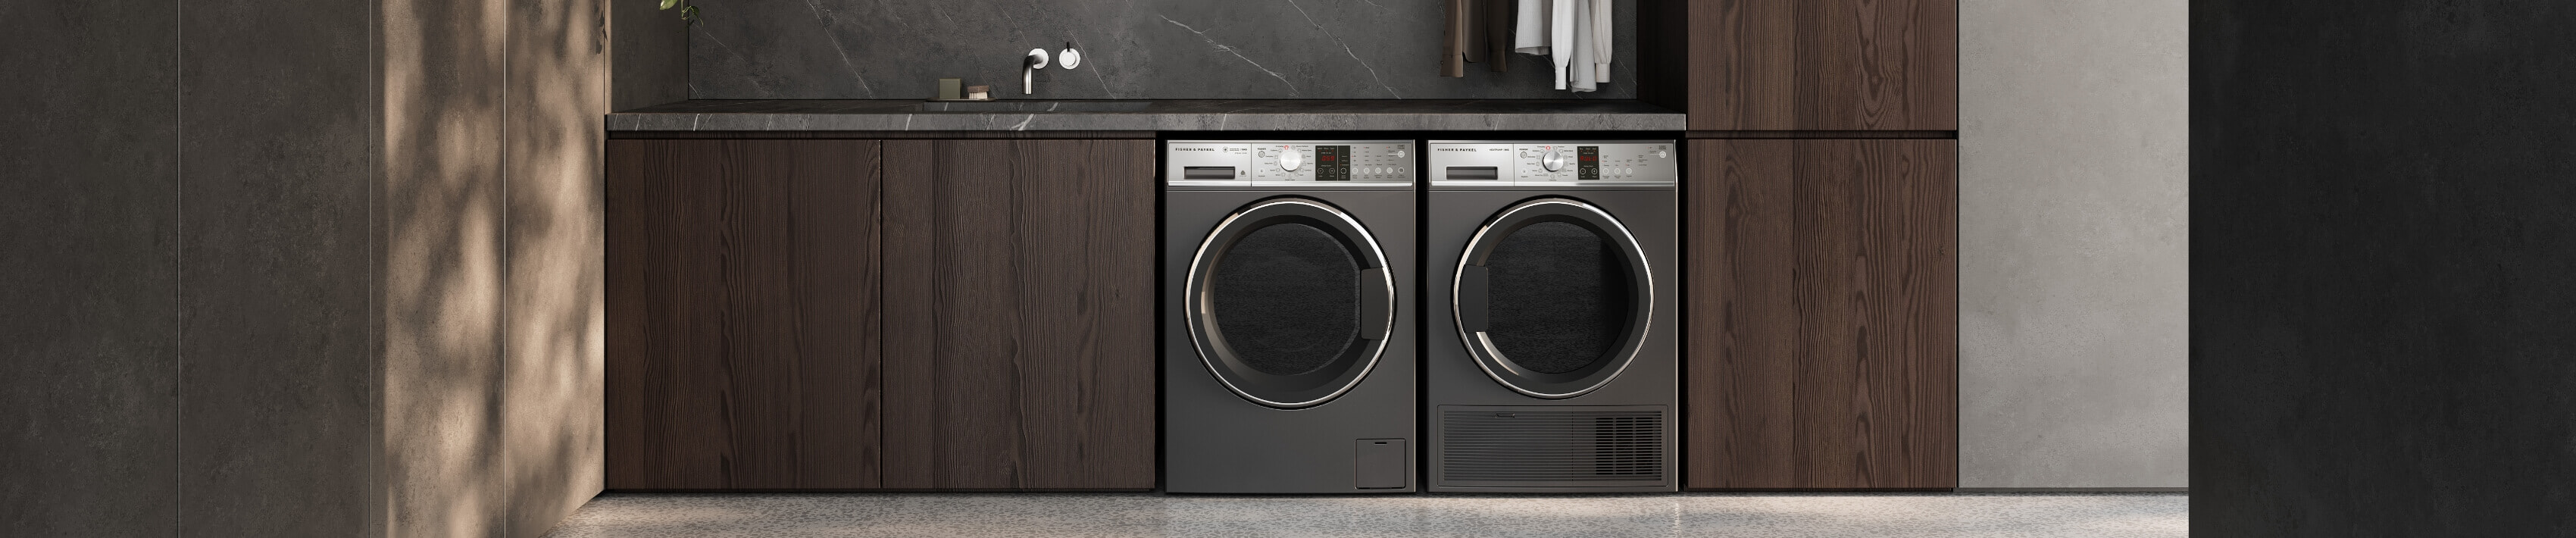 Stylish graphite coloured washer and dryer side by side in laundry.